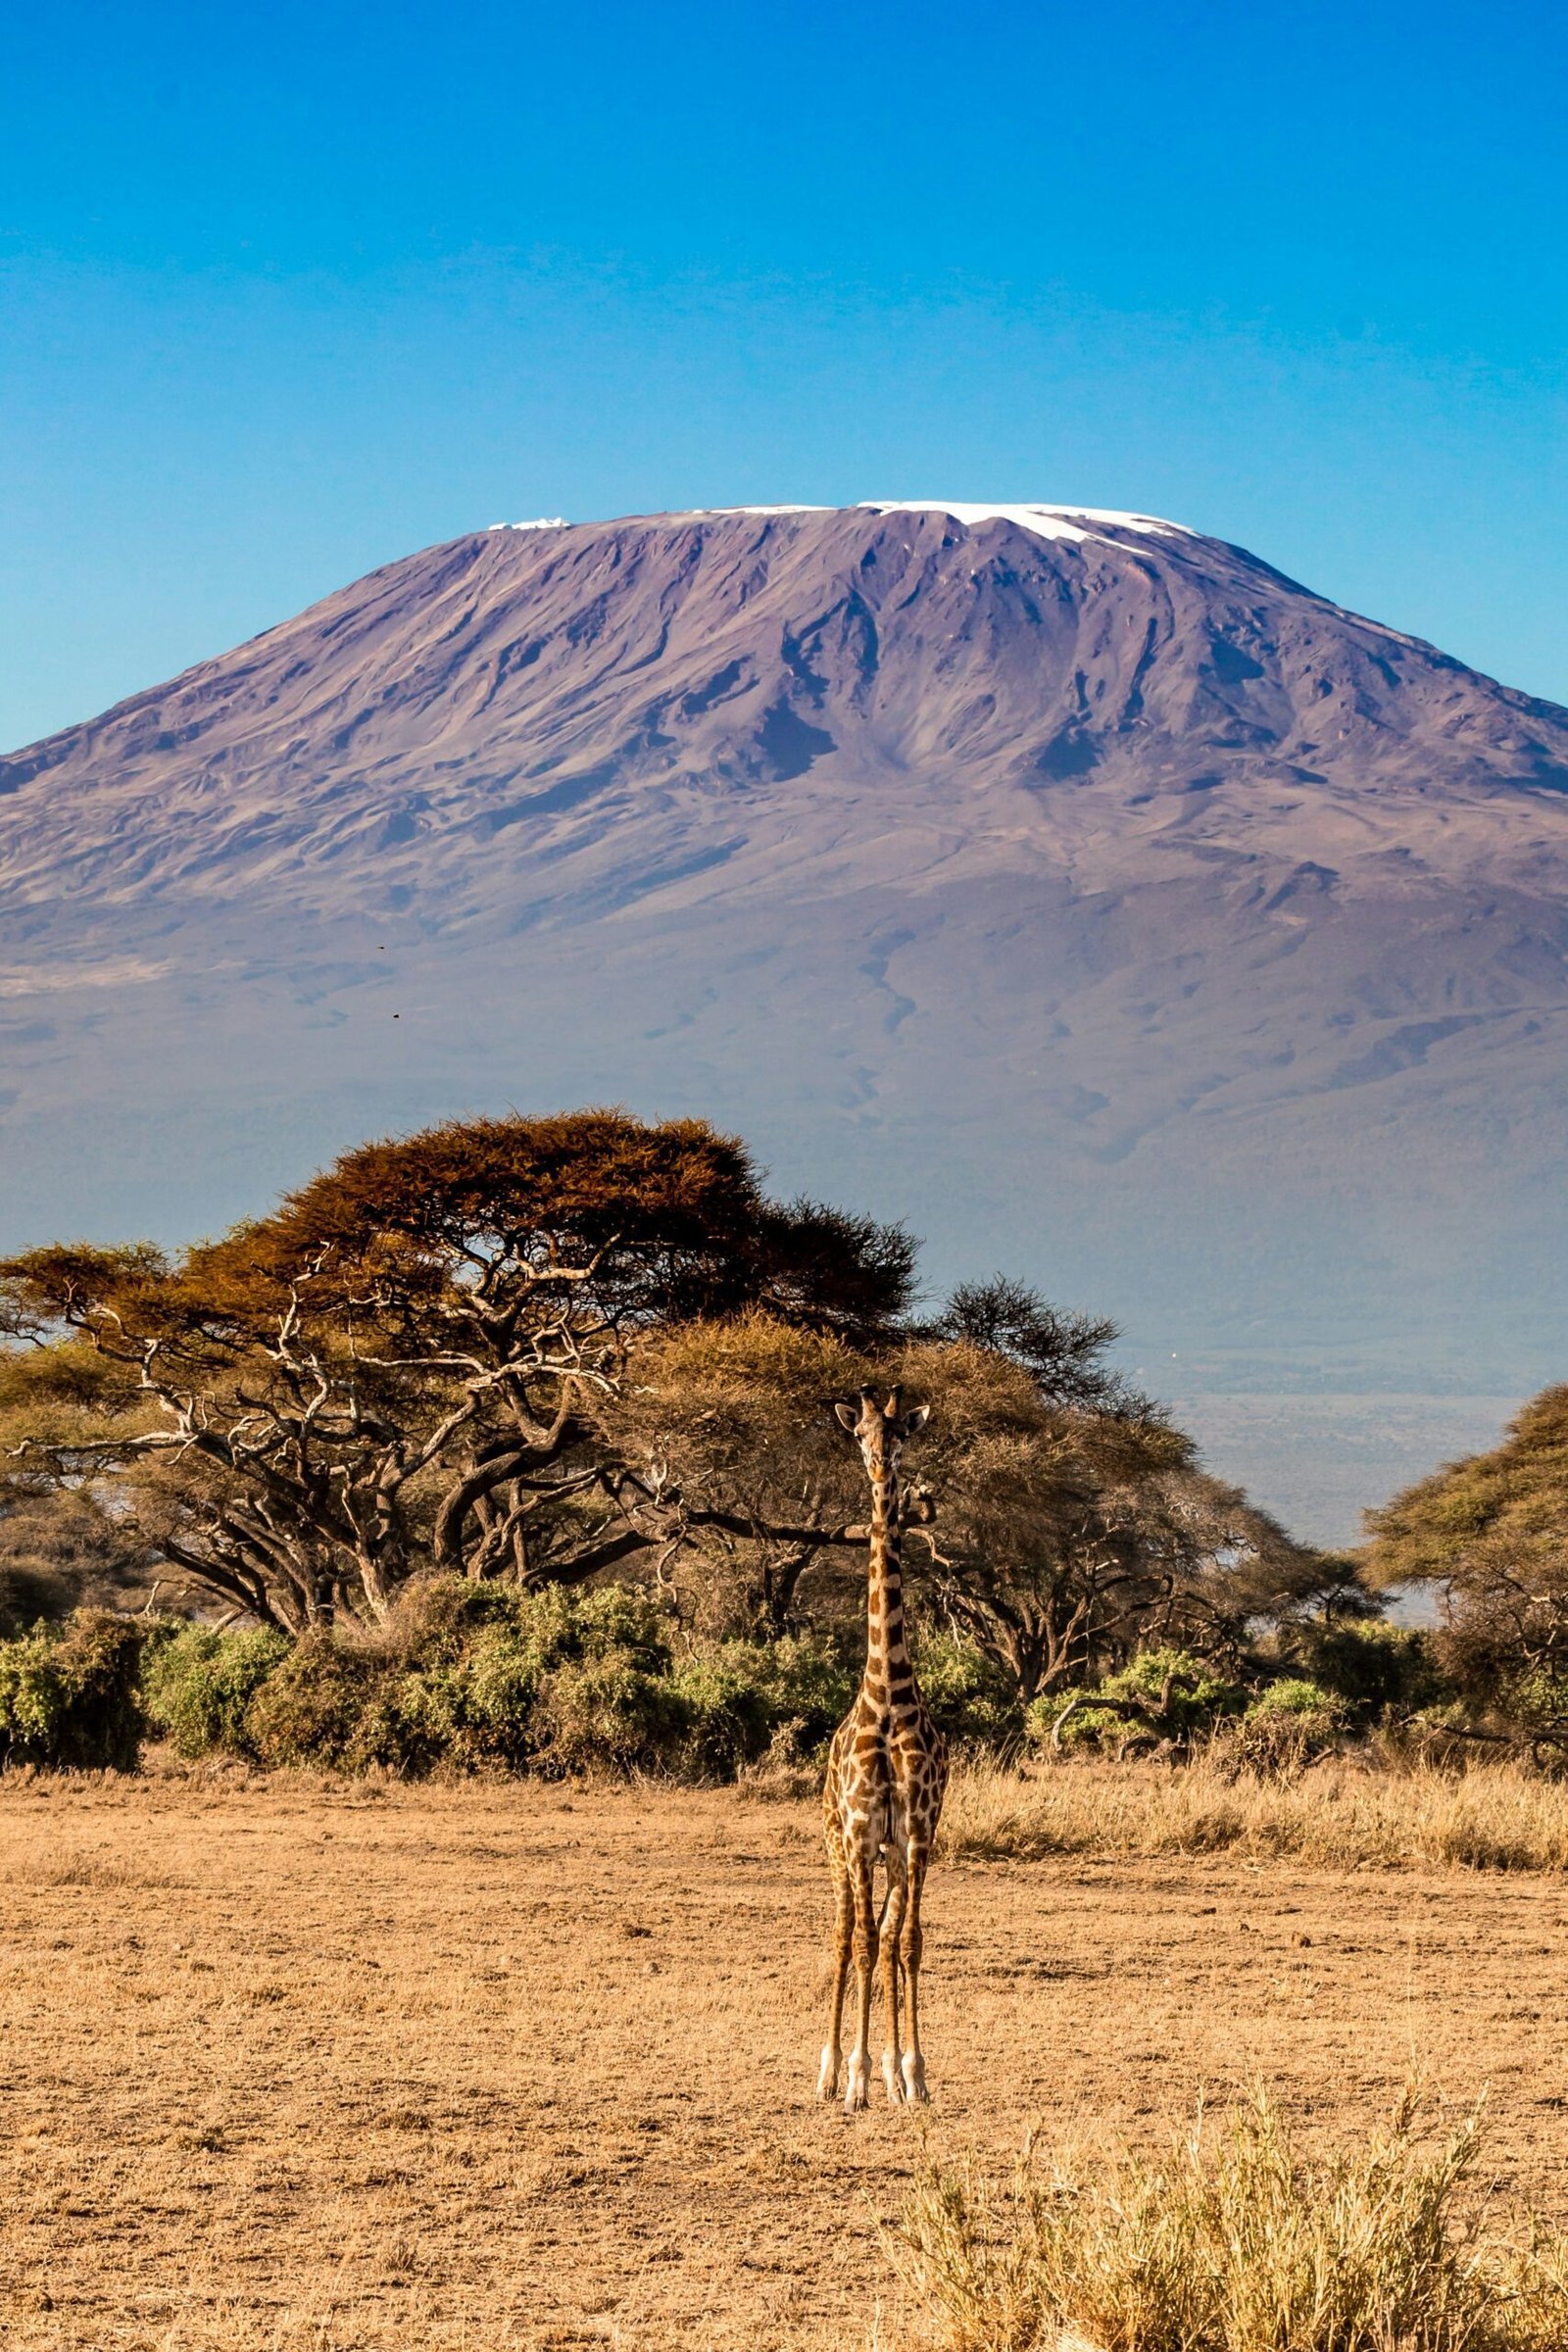 Mount Kilimanjaro with a giraffe in the foreground. This is in Amboseli National Park, Kenya